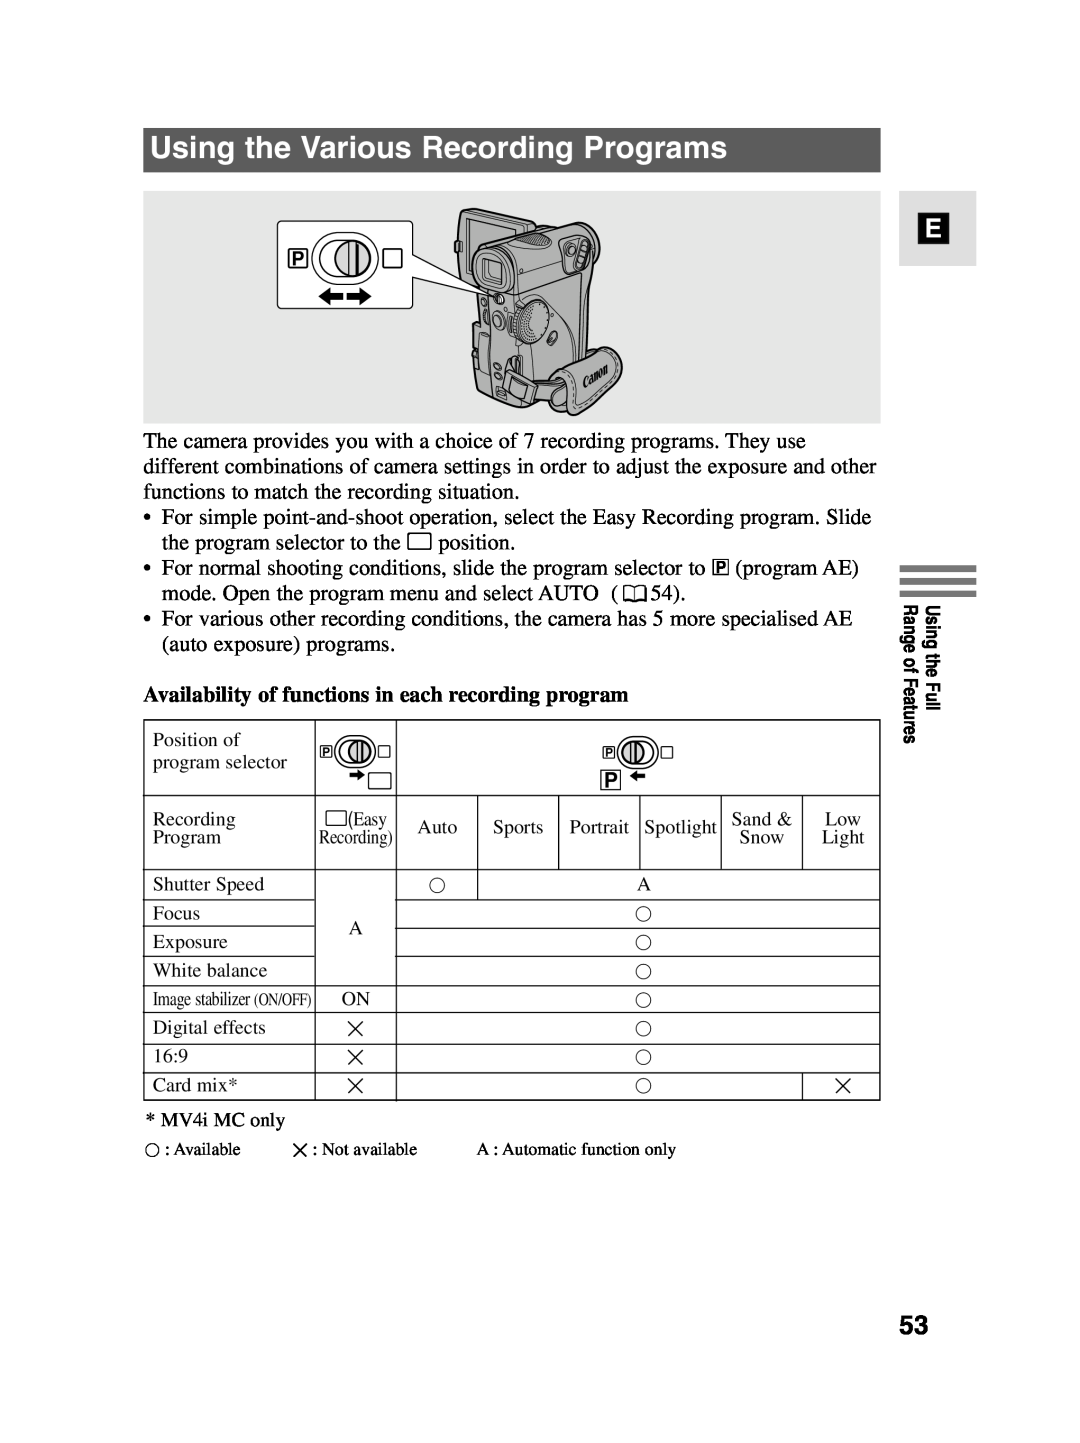 Canon MV4i MC instruction manual Using the Various Recording Programs, Availability of functions in each recording program 